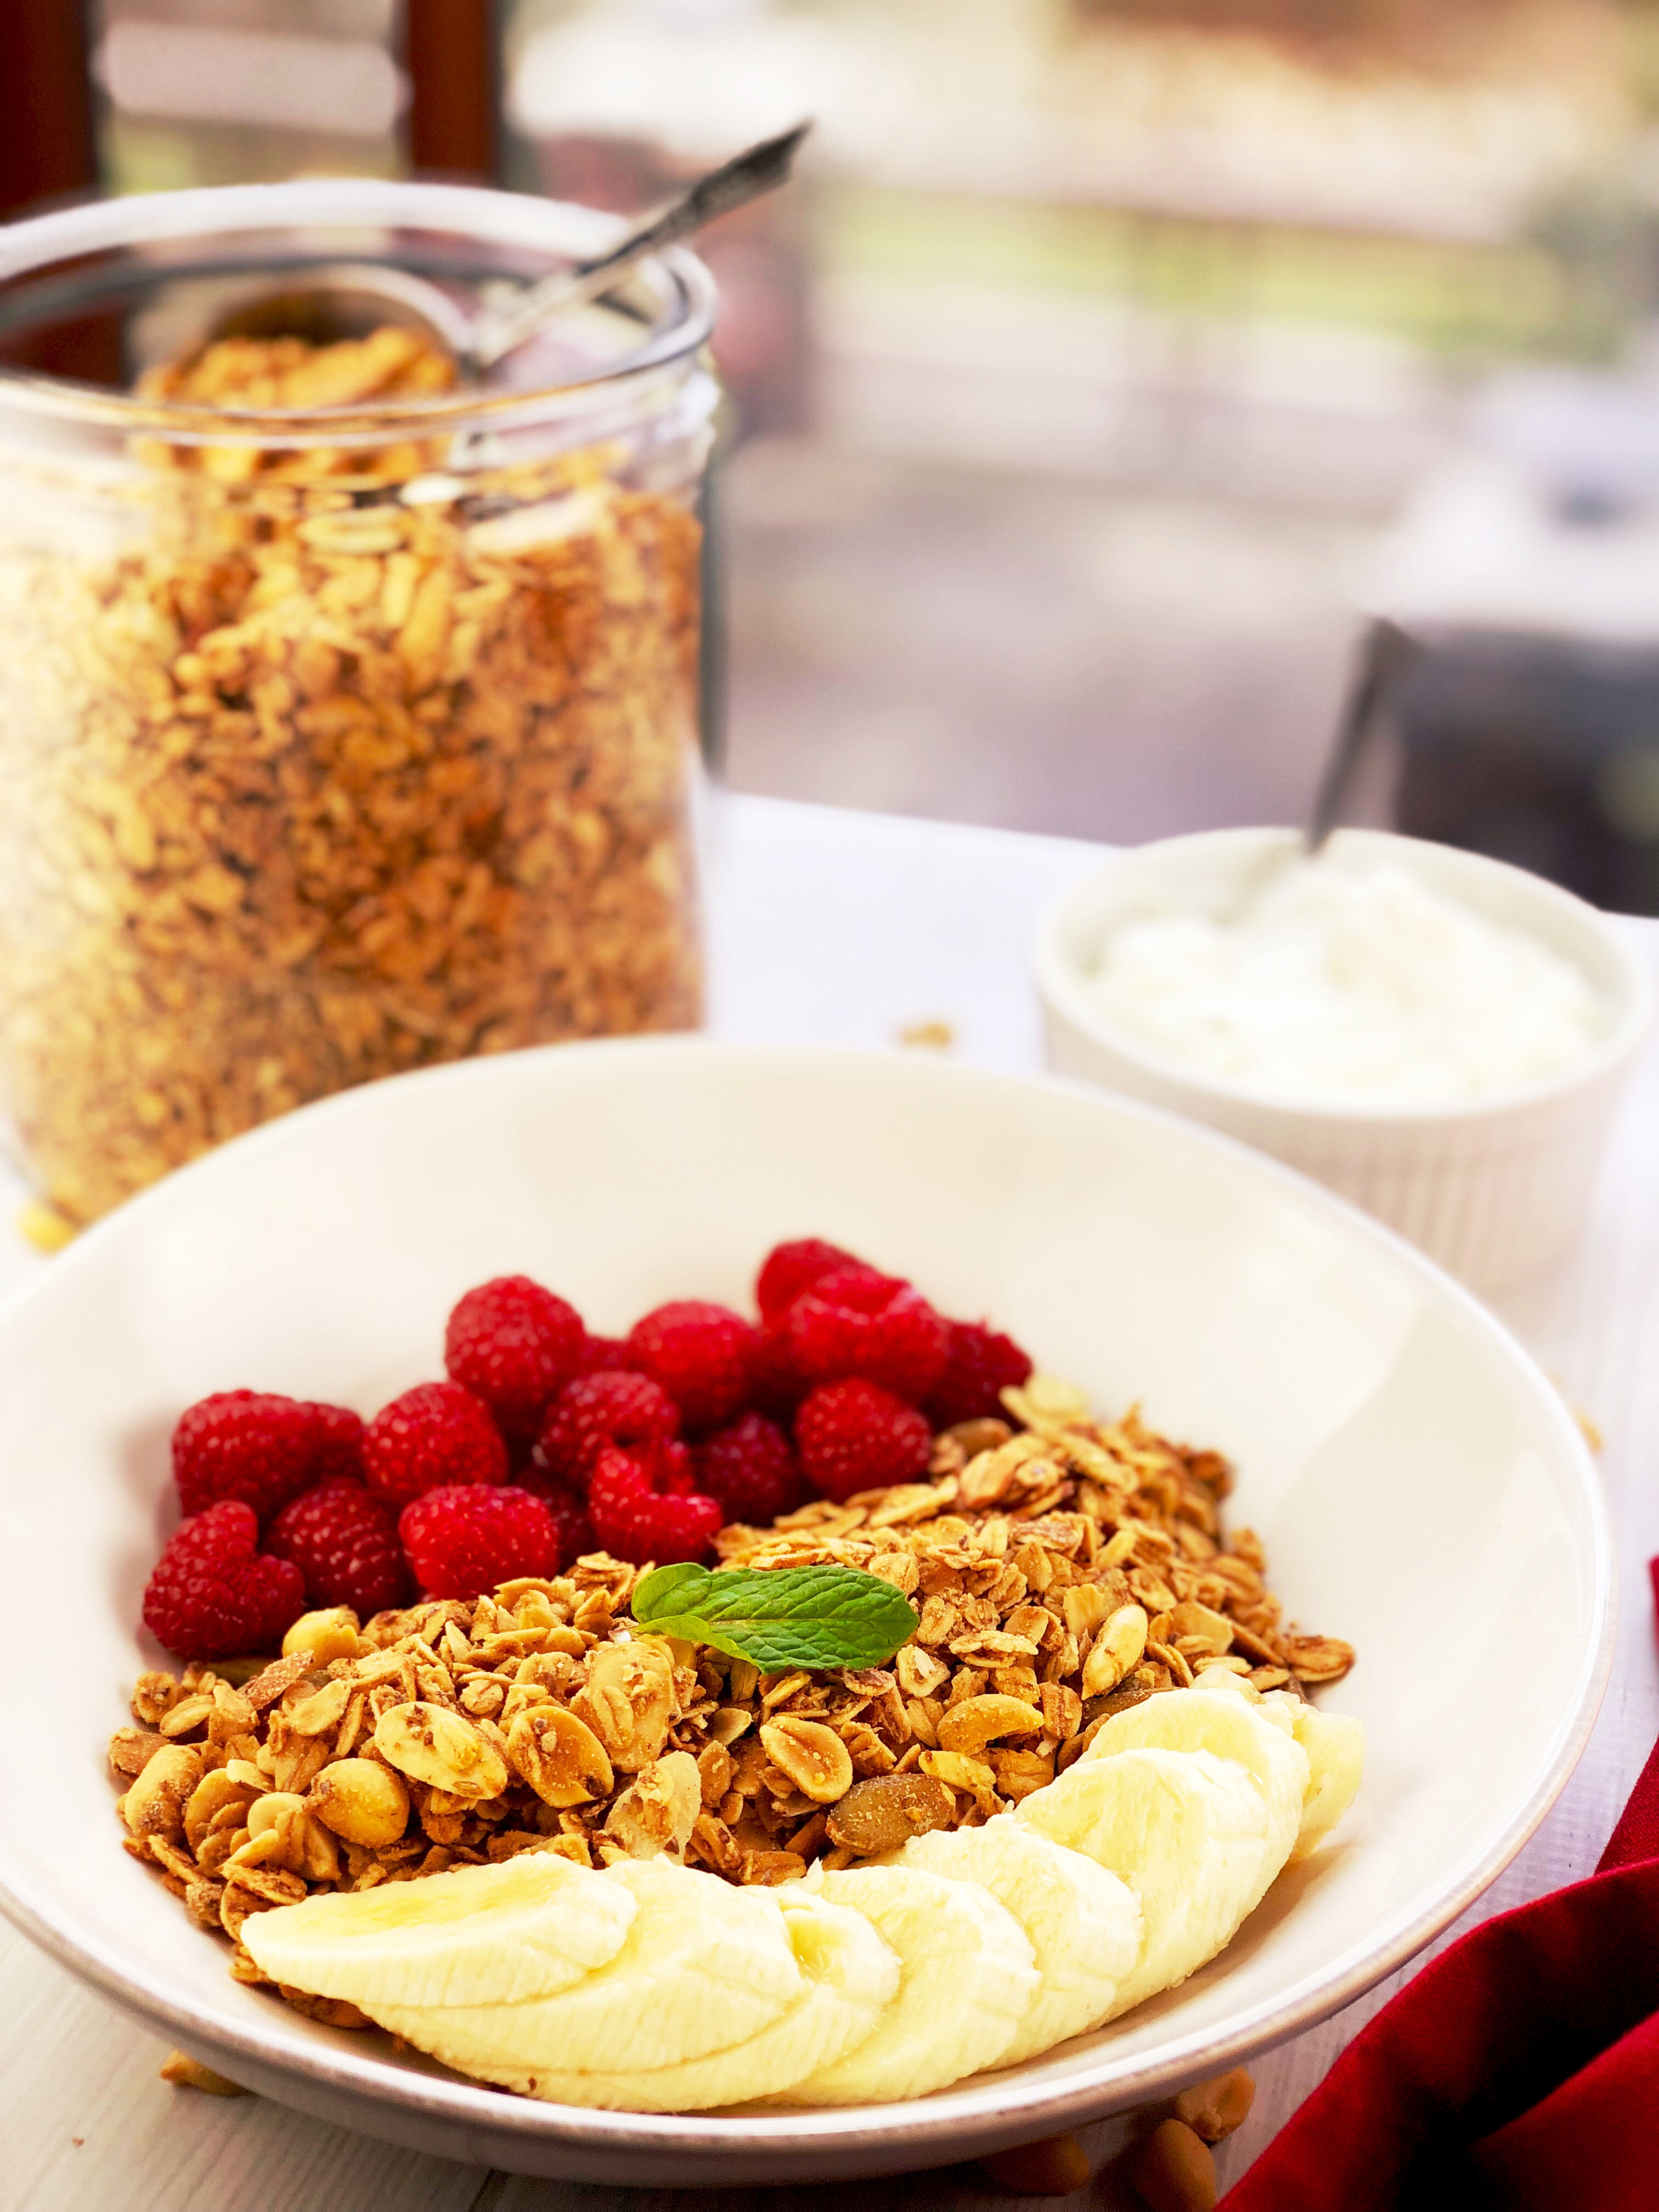 Peanut Butter Granola with raspberries and bananas